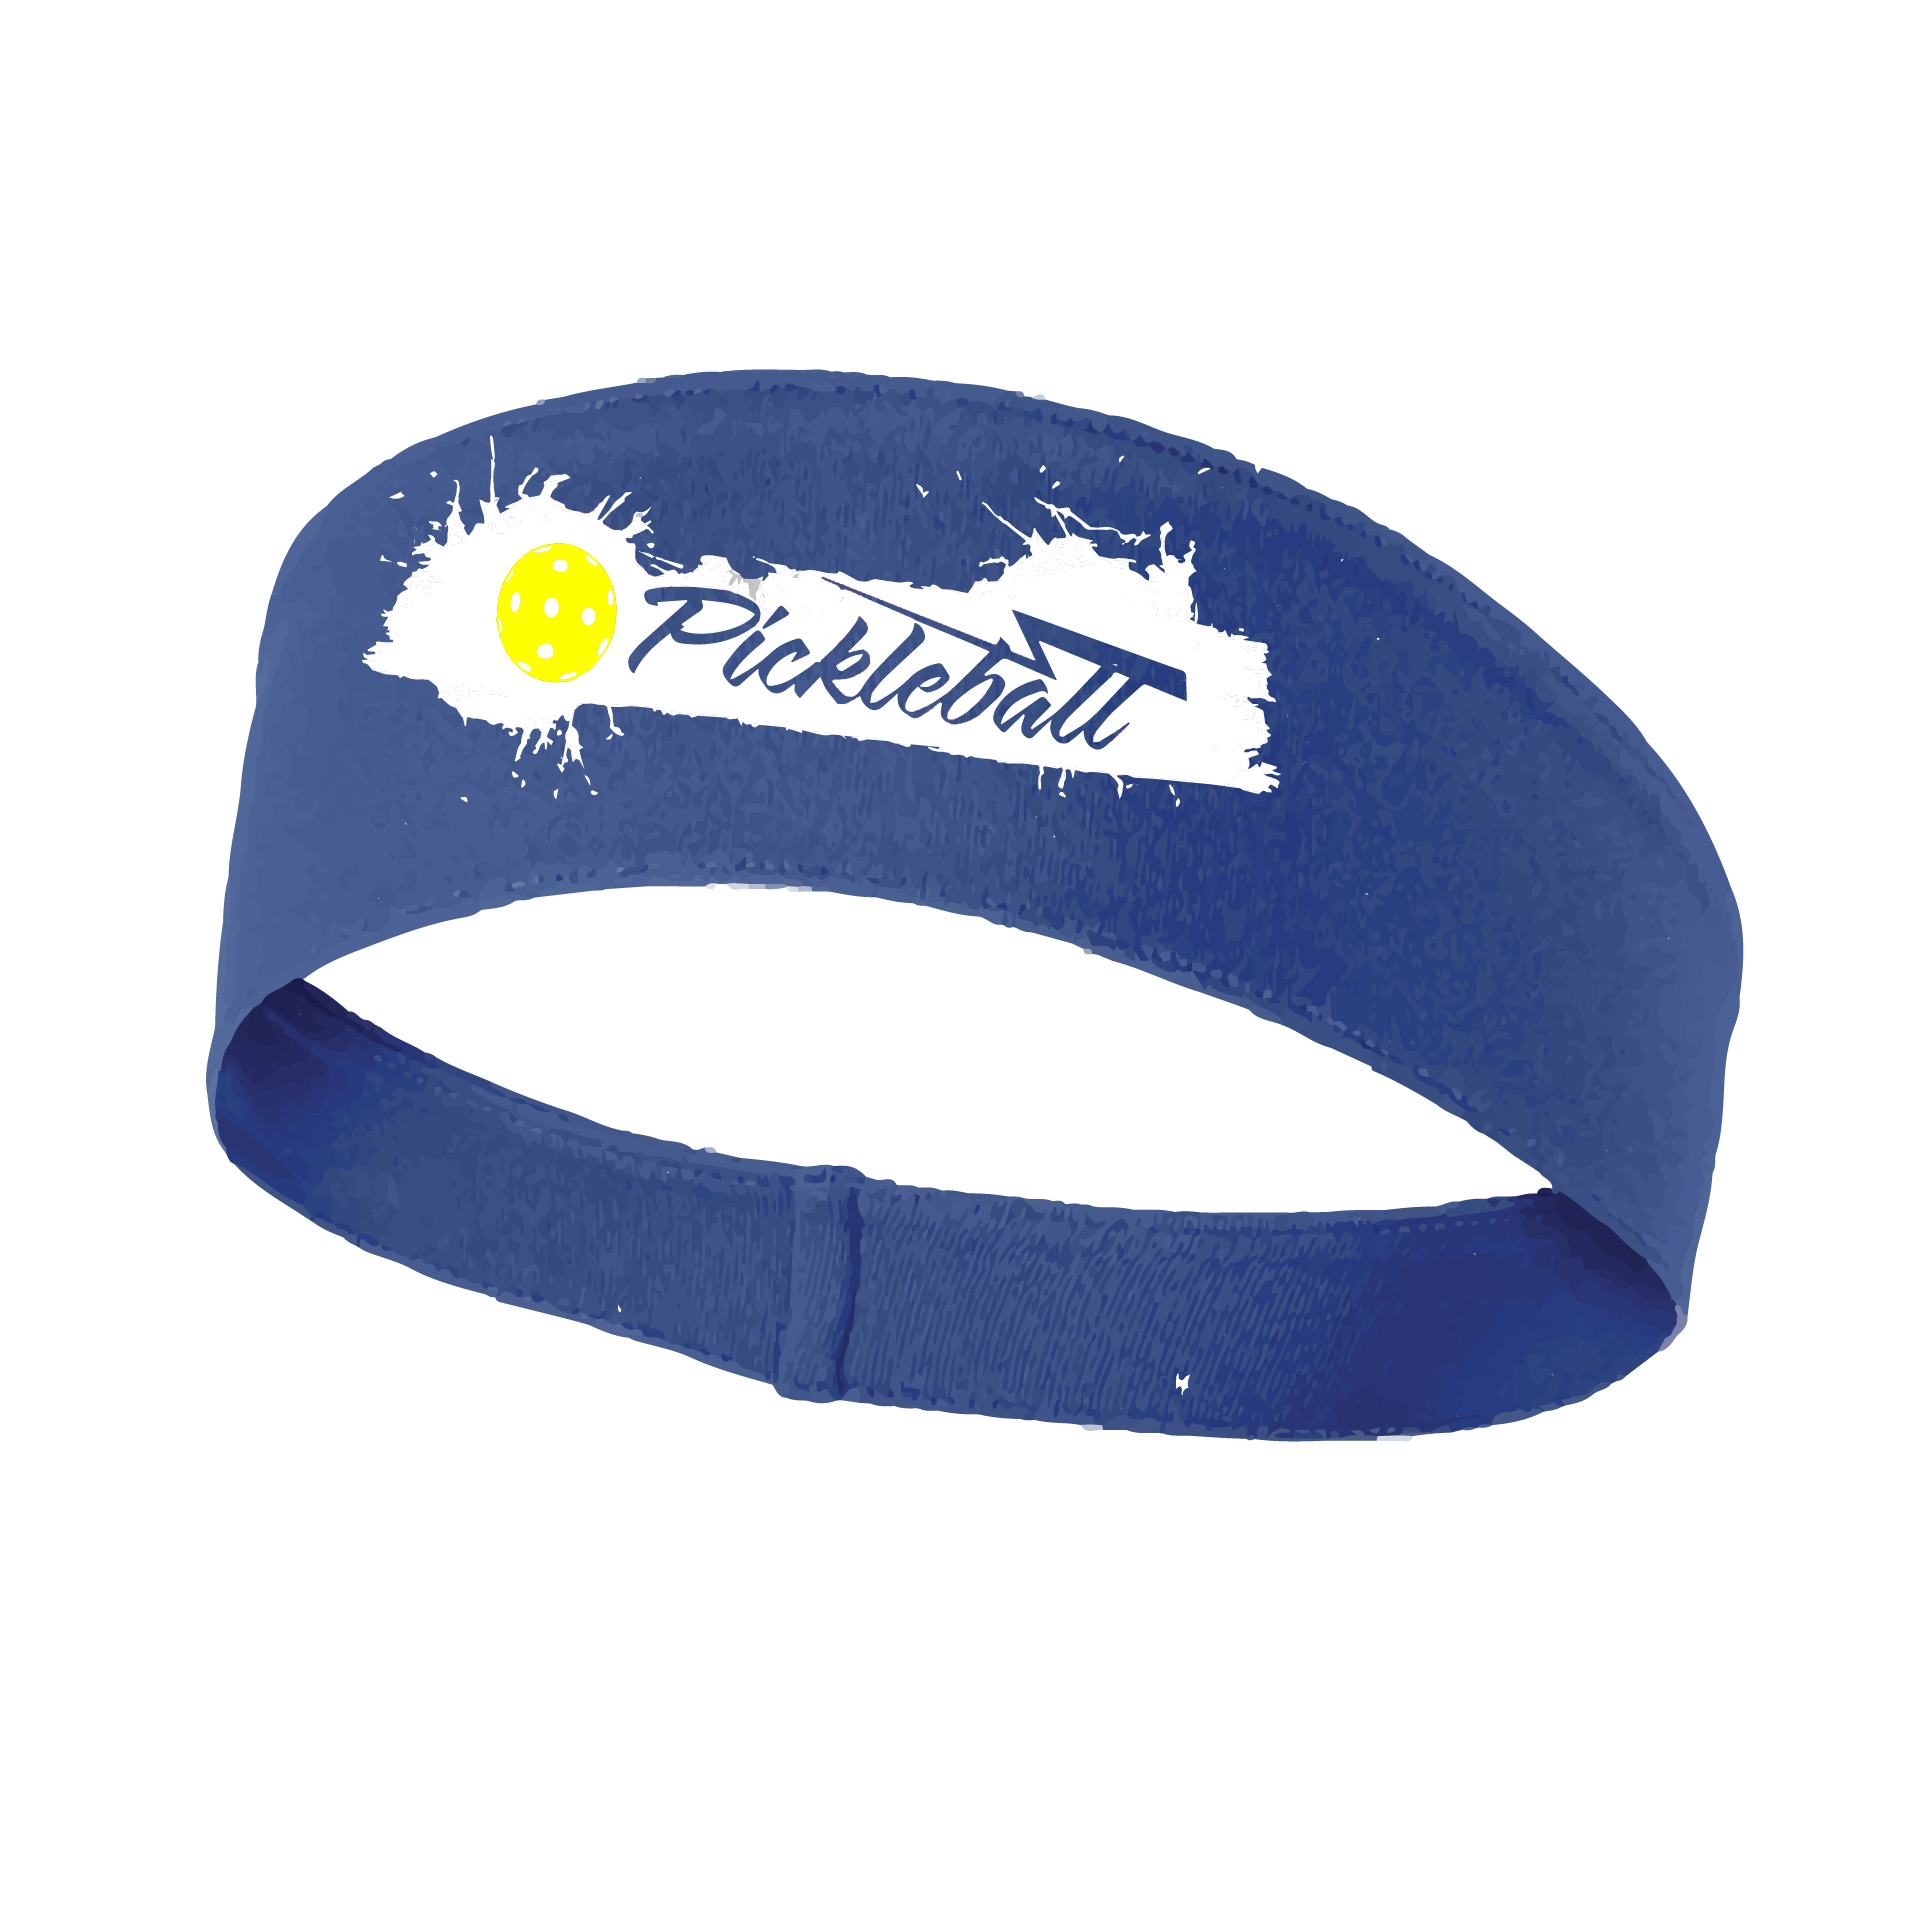 Pickleball Design: Extreme Pickleball  This fun, pickleball designed, moisture-wicking headband narrows in the back to fit more securely. Single-needle top-stitched edging. These headbands come in a variety of colors. Truly shows your love for the sport of pickleball!!